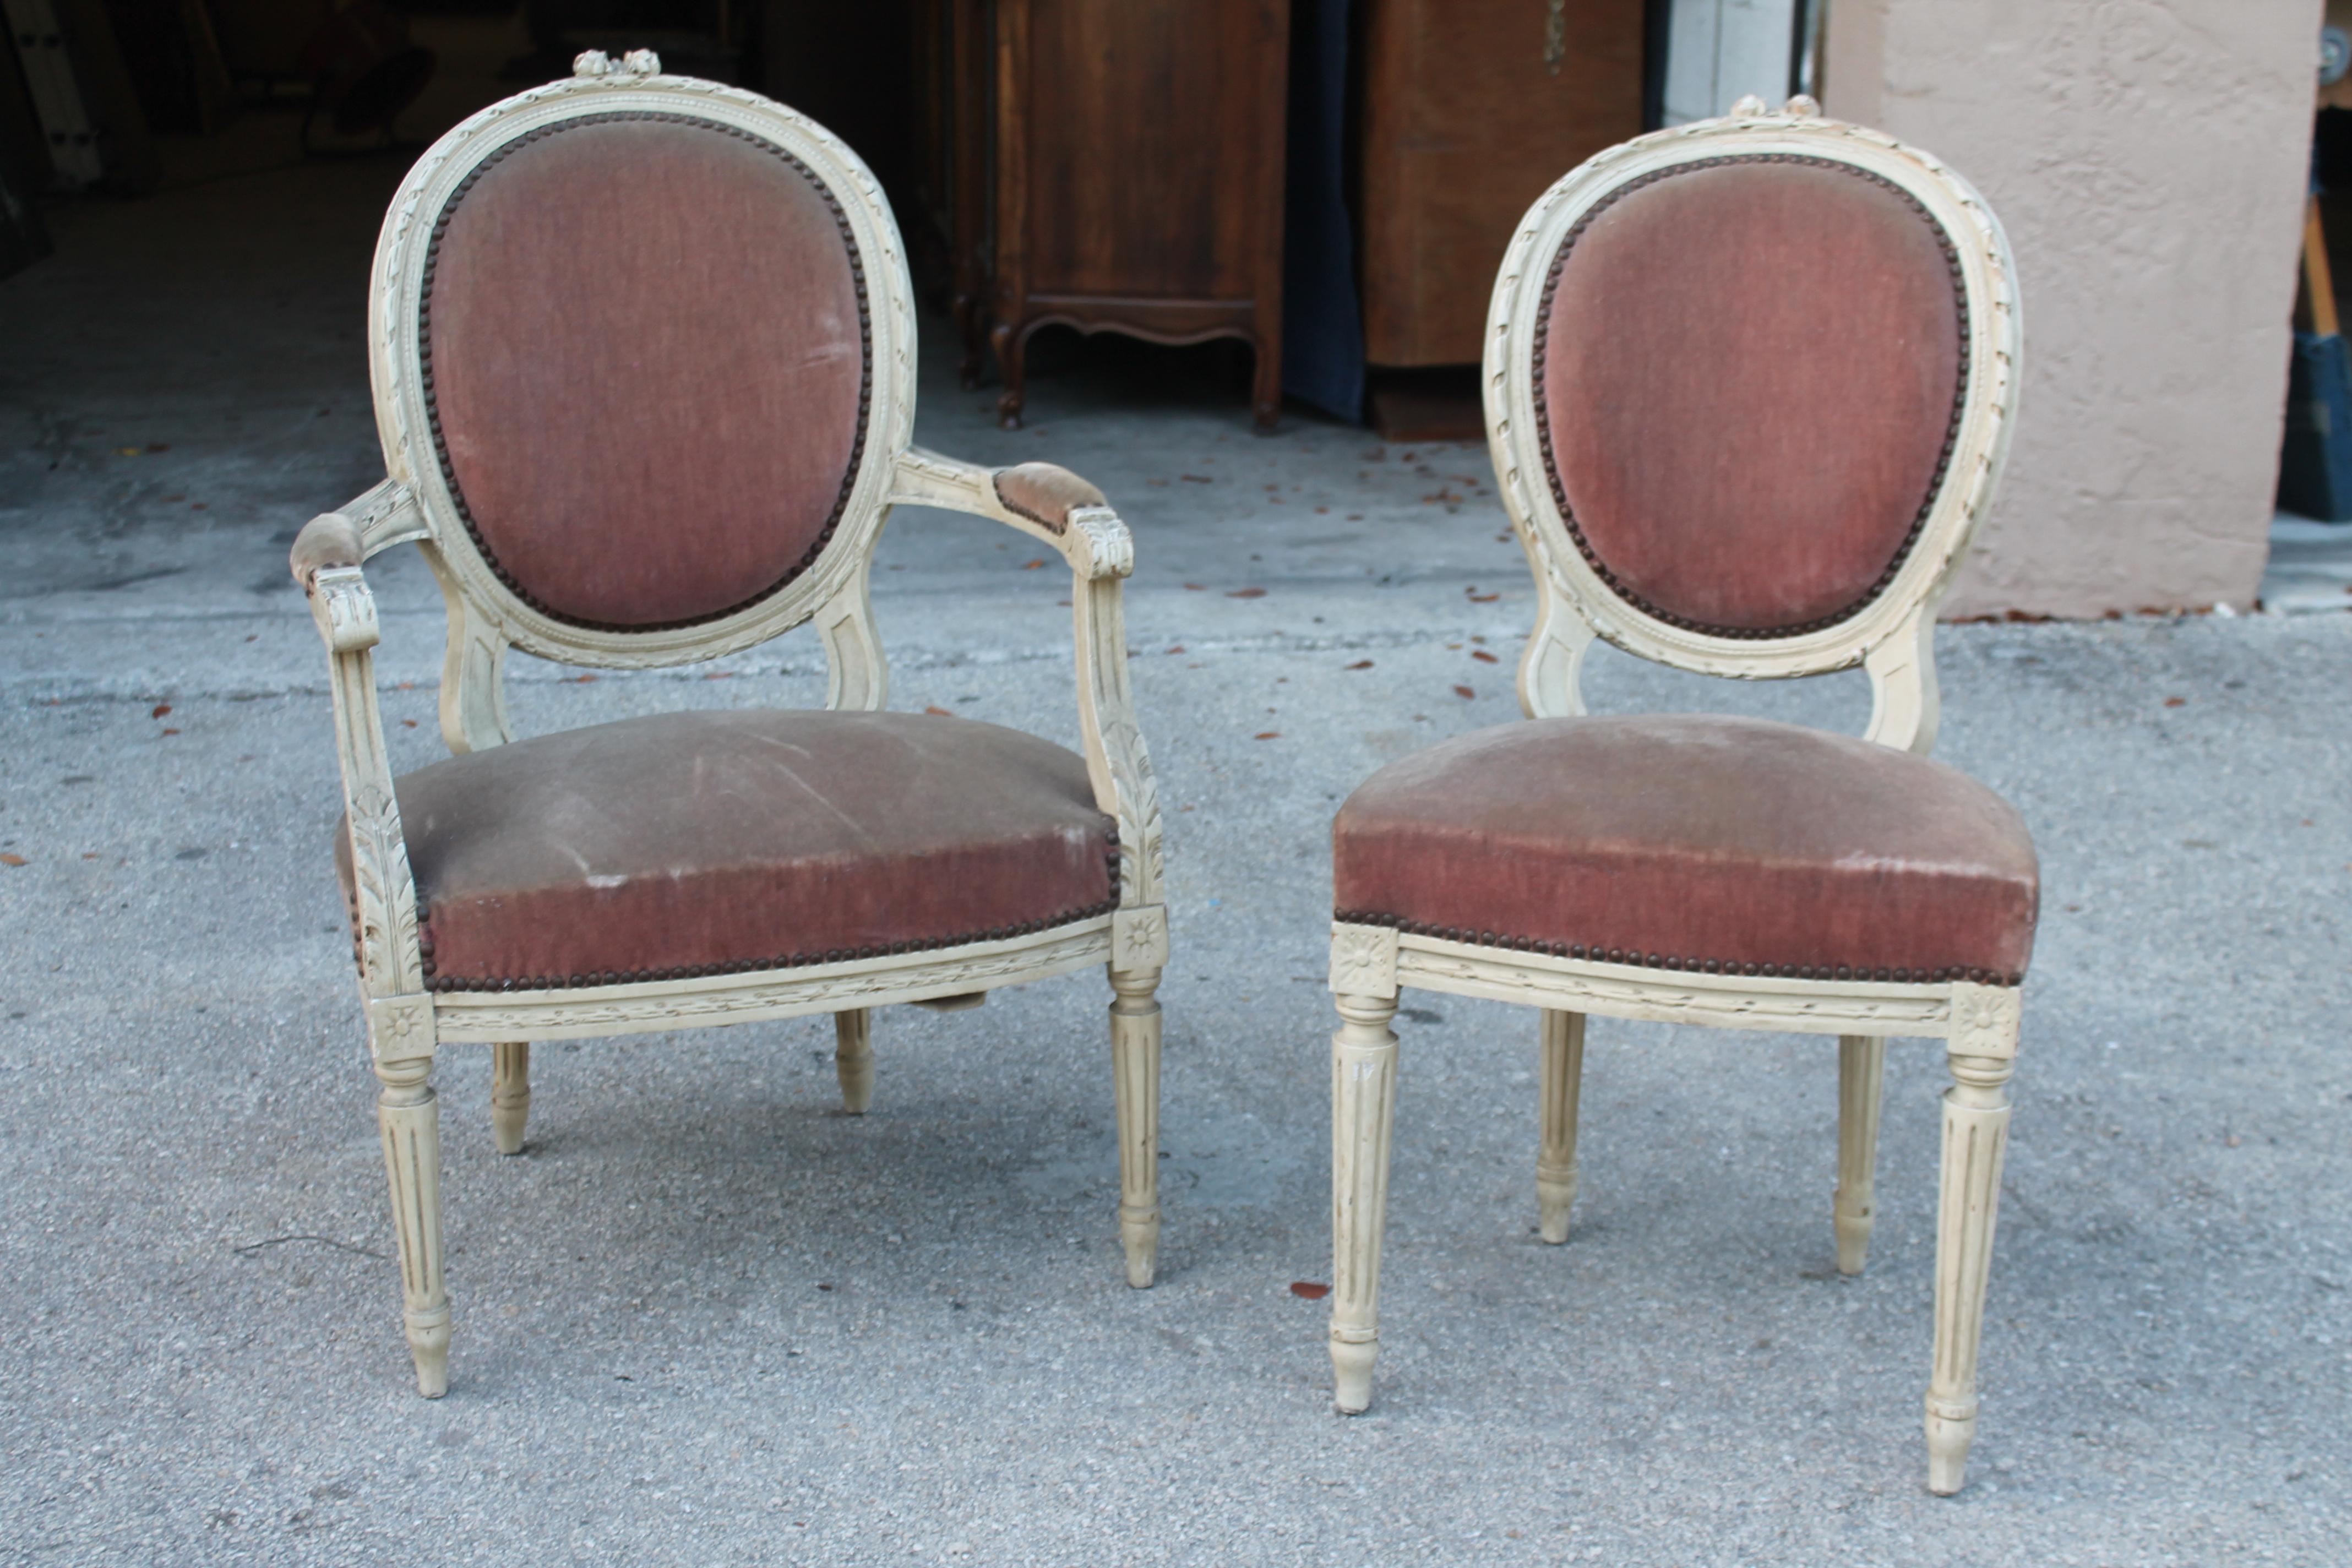  19thc French Louis XVI Arm Chair and Side Chair [2 piece] In Good Condition For Sale In Opa Locka, FL